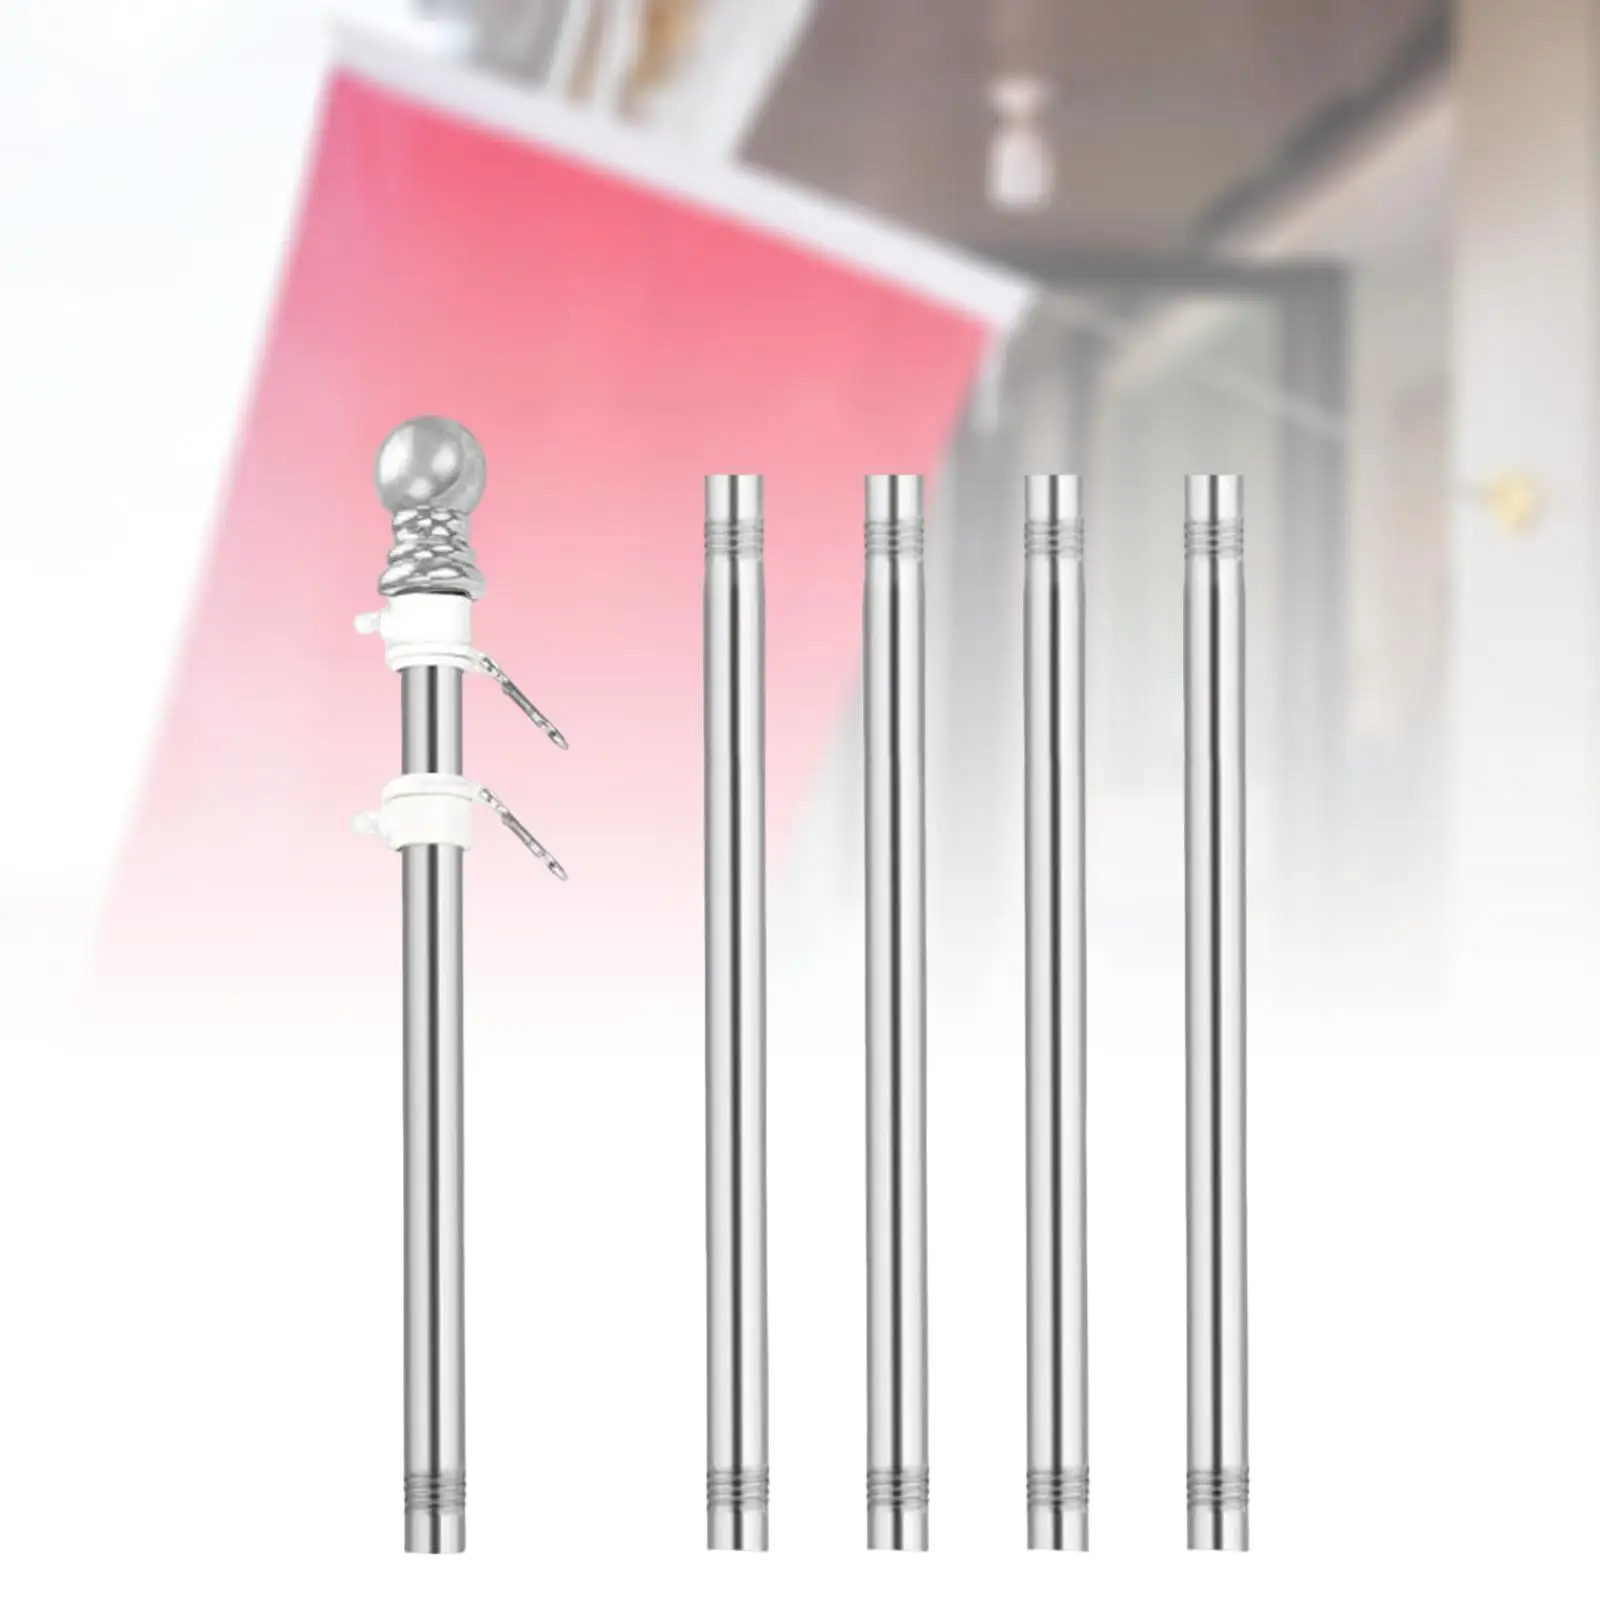 5x Stainless Steel Flag Flag Pole Guide Banner Five Sections Rod Garden Flag Pole Outdoor Residential House Porch